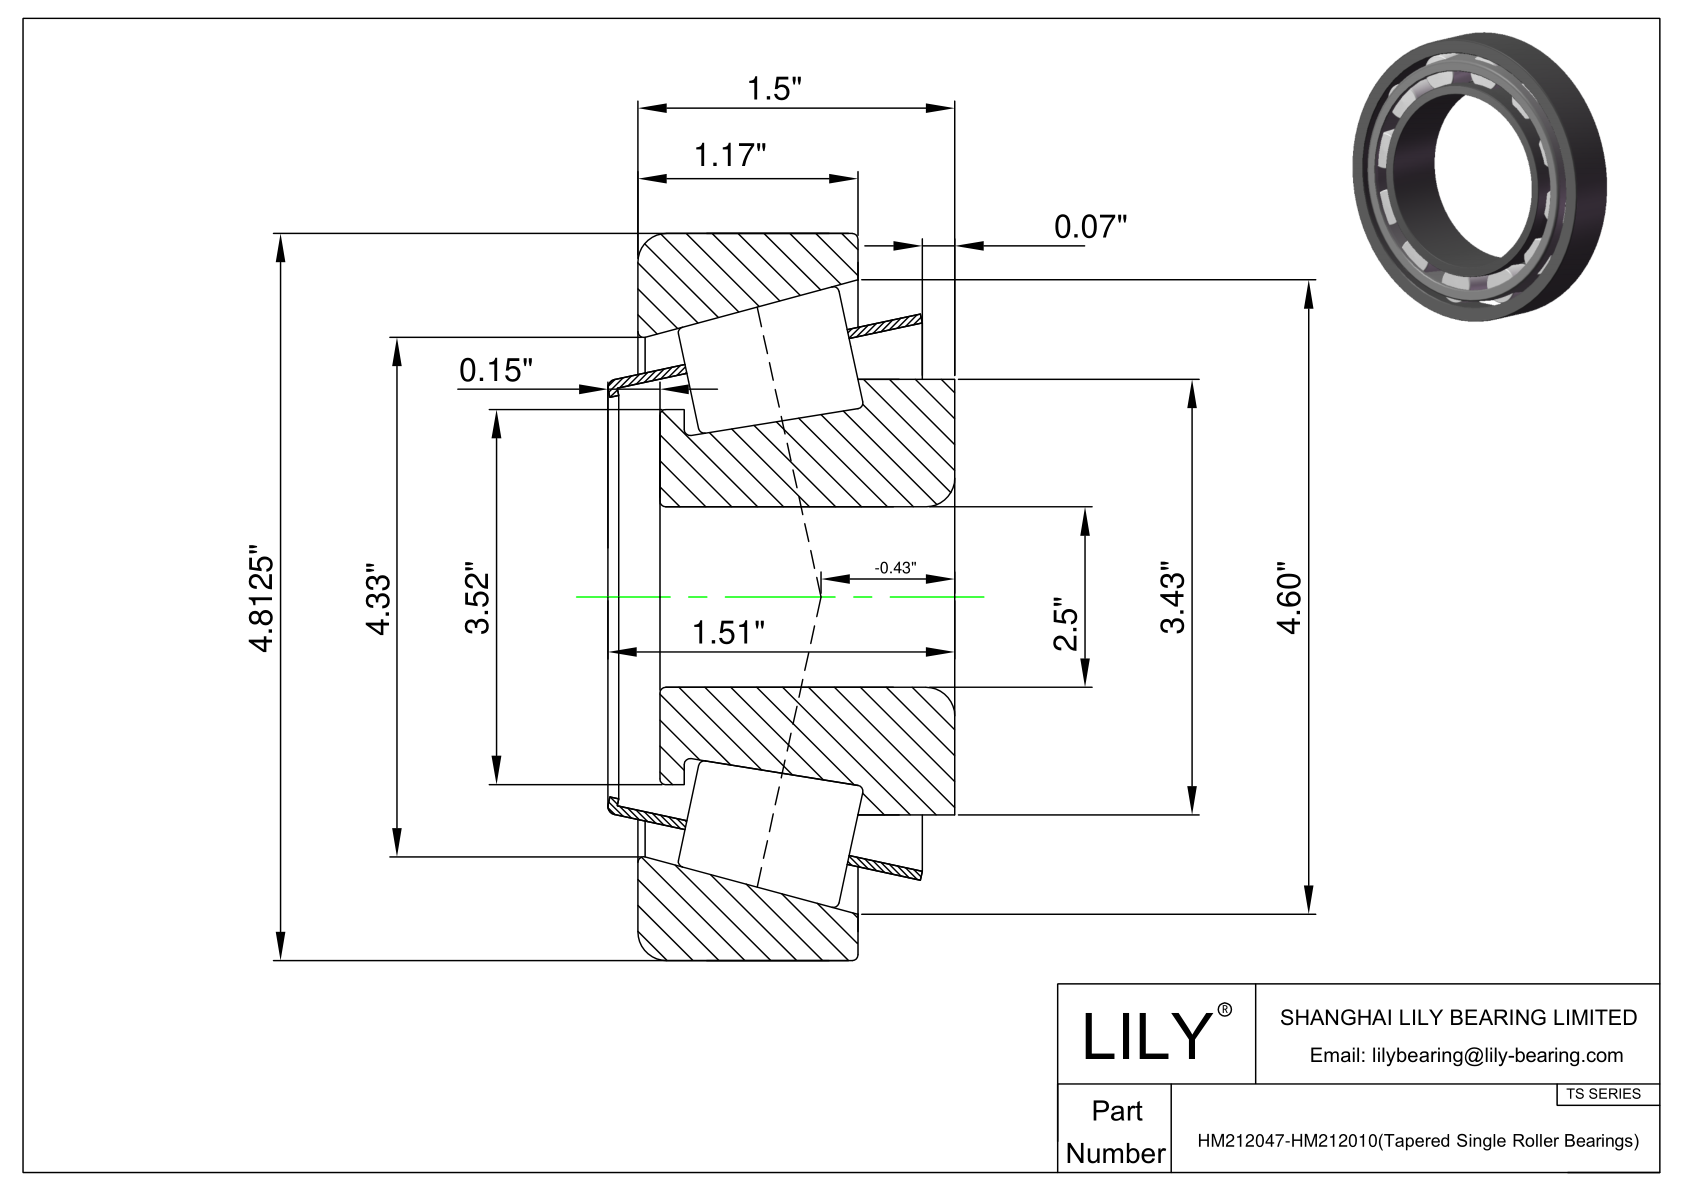 HM212047-HM212010 TS (Tapered Single Roller Bearings) (Imperial) cad drawing